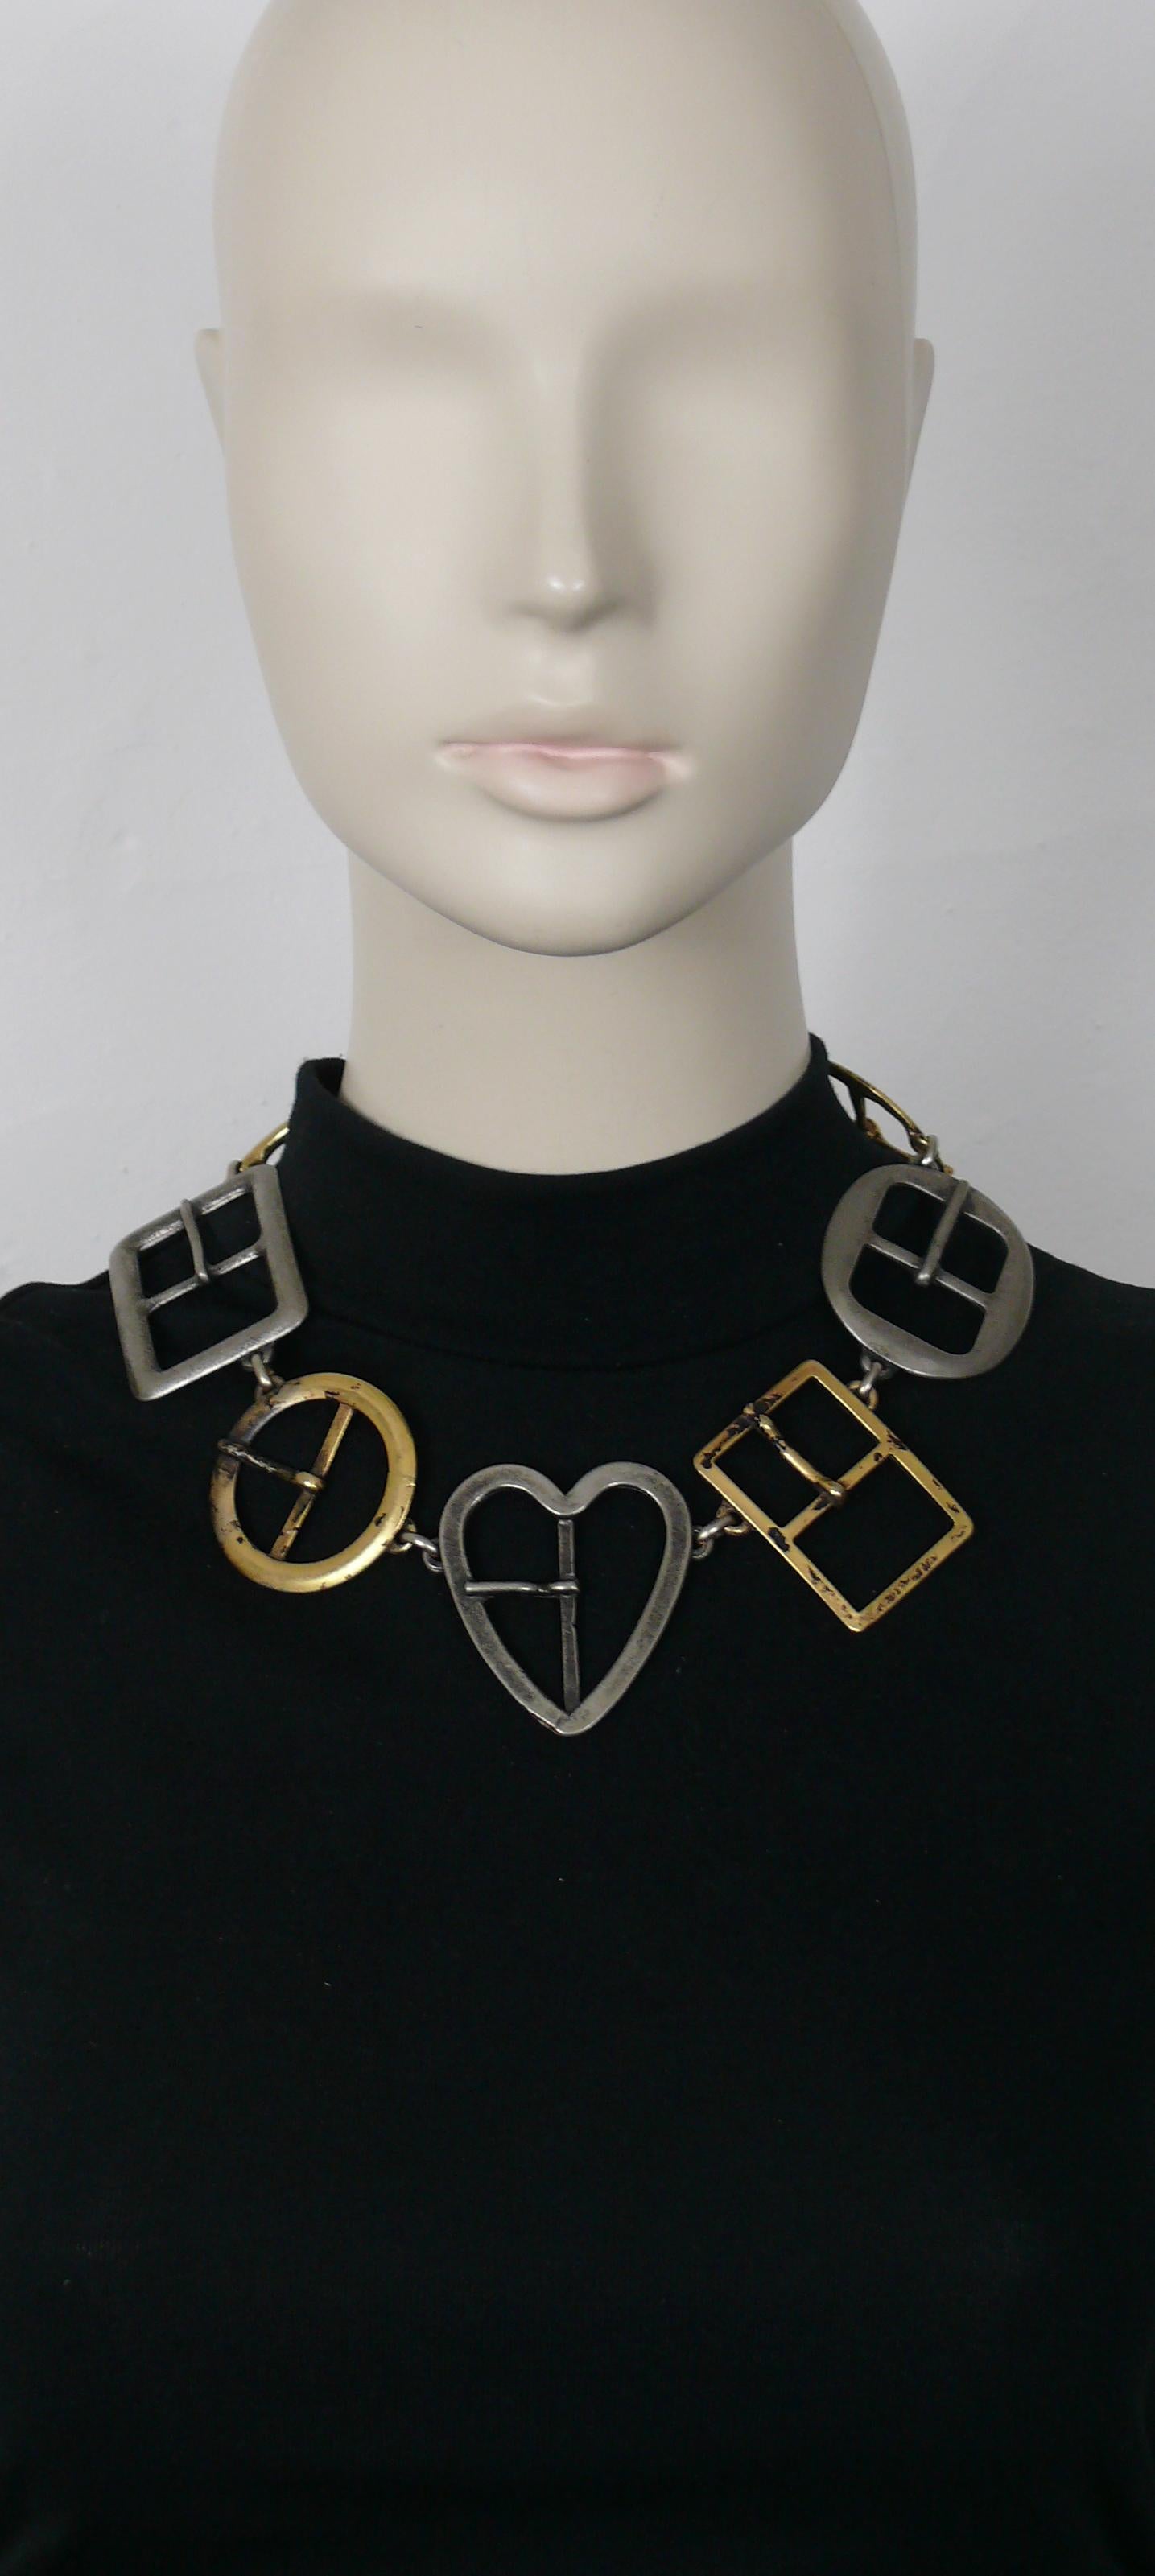 MOSCHINO vintage necklace featuring buckle links.

Silver tone and gold tone hardware.
Antiqued patina.

The antiqued/black patina is from original manufacturing.

T-bar and toggle closure.

Embossed MOSCHINO.

Indicative measurement : length